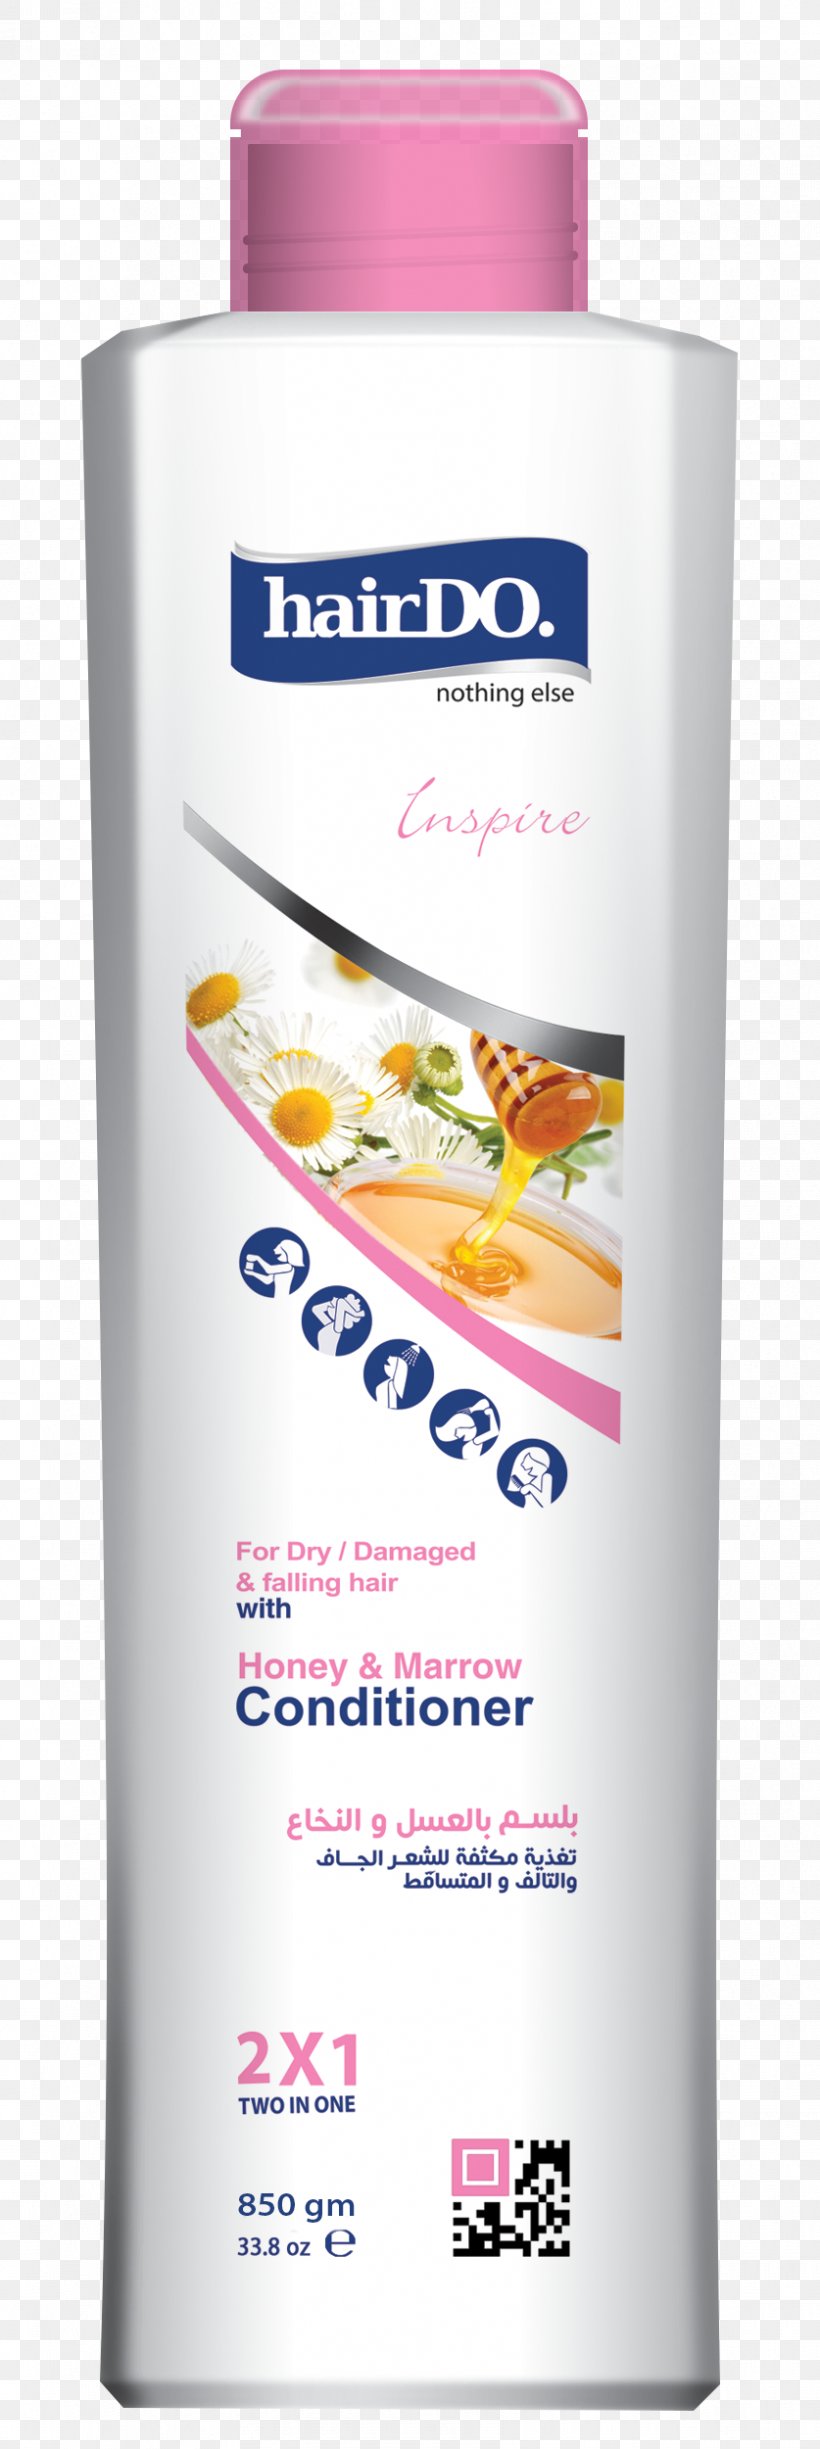 Lotion بوبانا Cosmetics Cosmeceutical Product, PNG, 837x2500px, Lotion, Business, Cosmeceutical, Cosmetics, Egypt Download Free